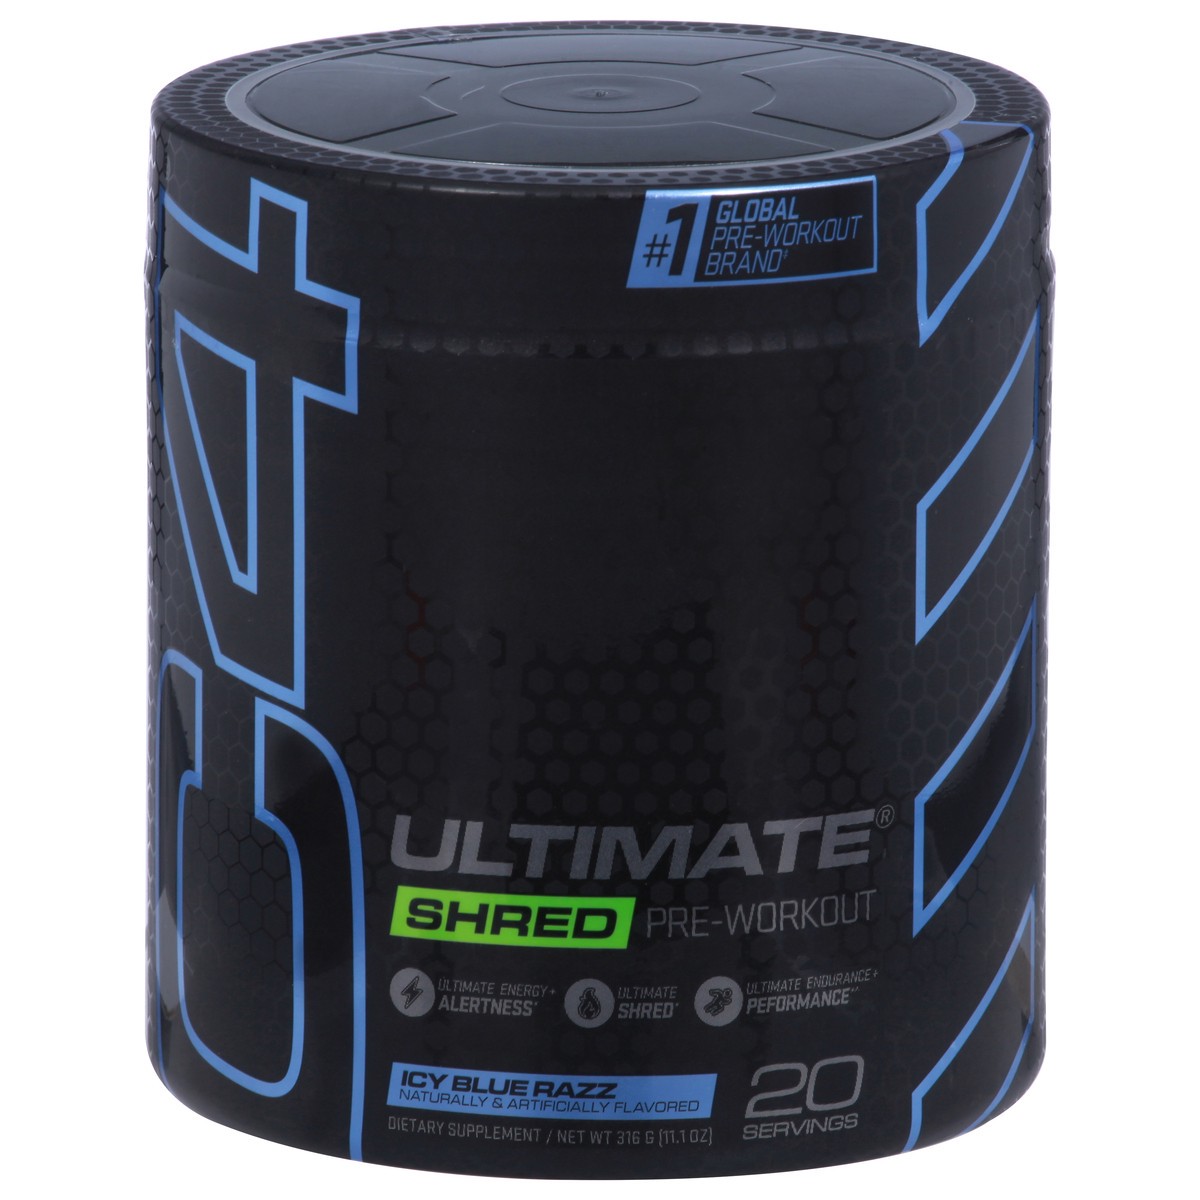 slide 7 of 10, C4 Sport Ultimate Shred Icy Blue Razz Pre-Workout 11.1 oz, 11.10 ct